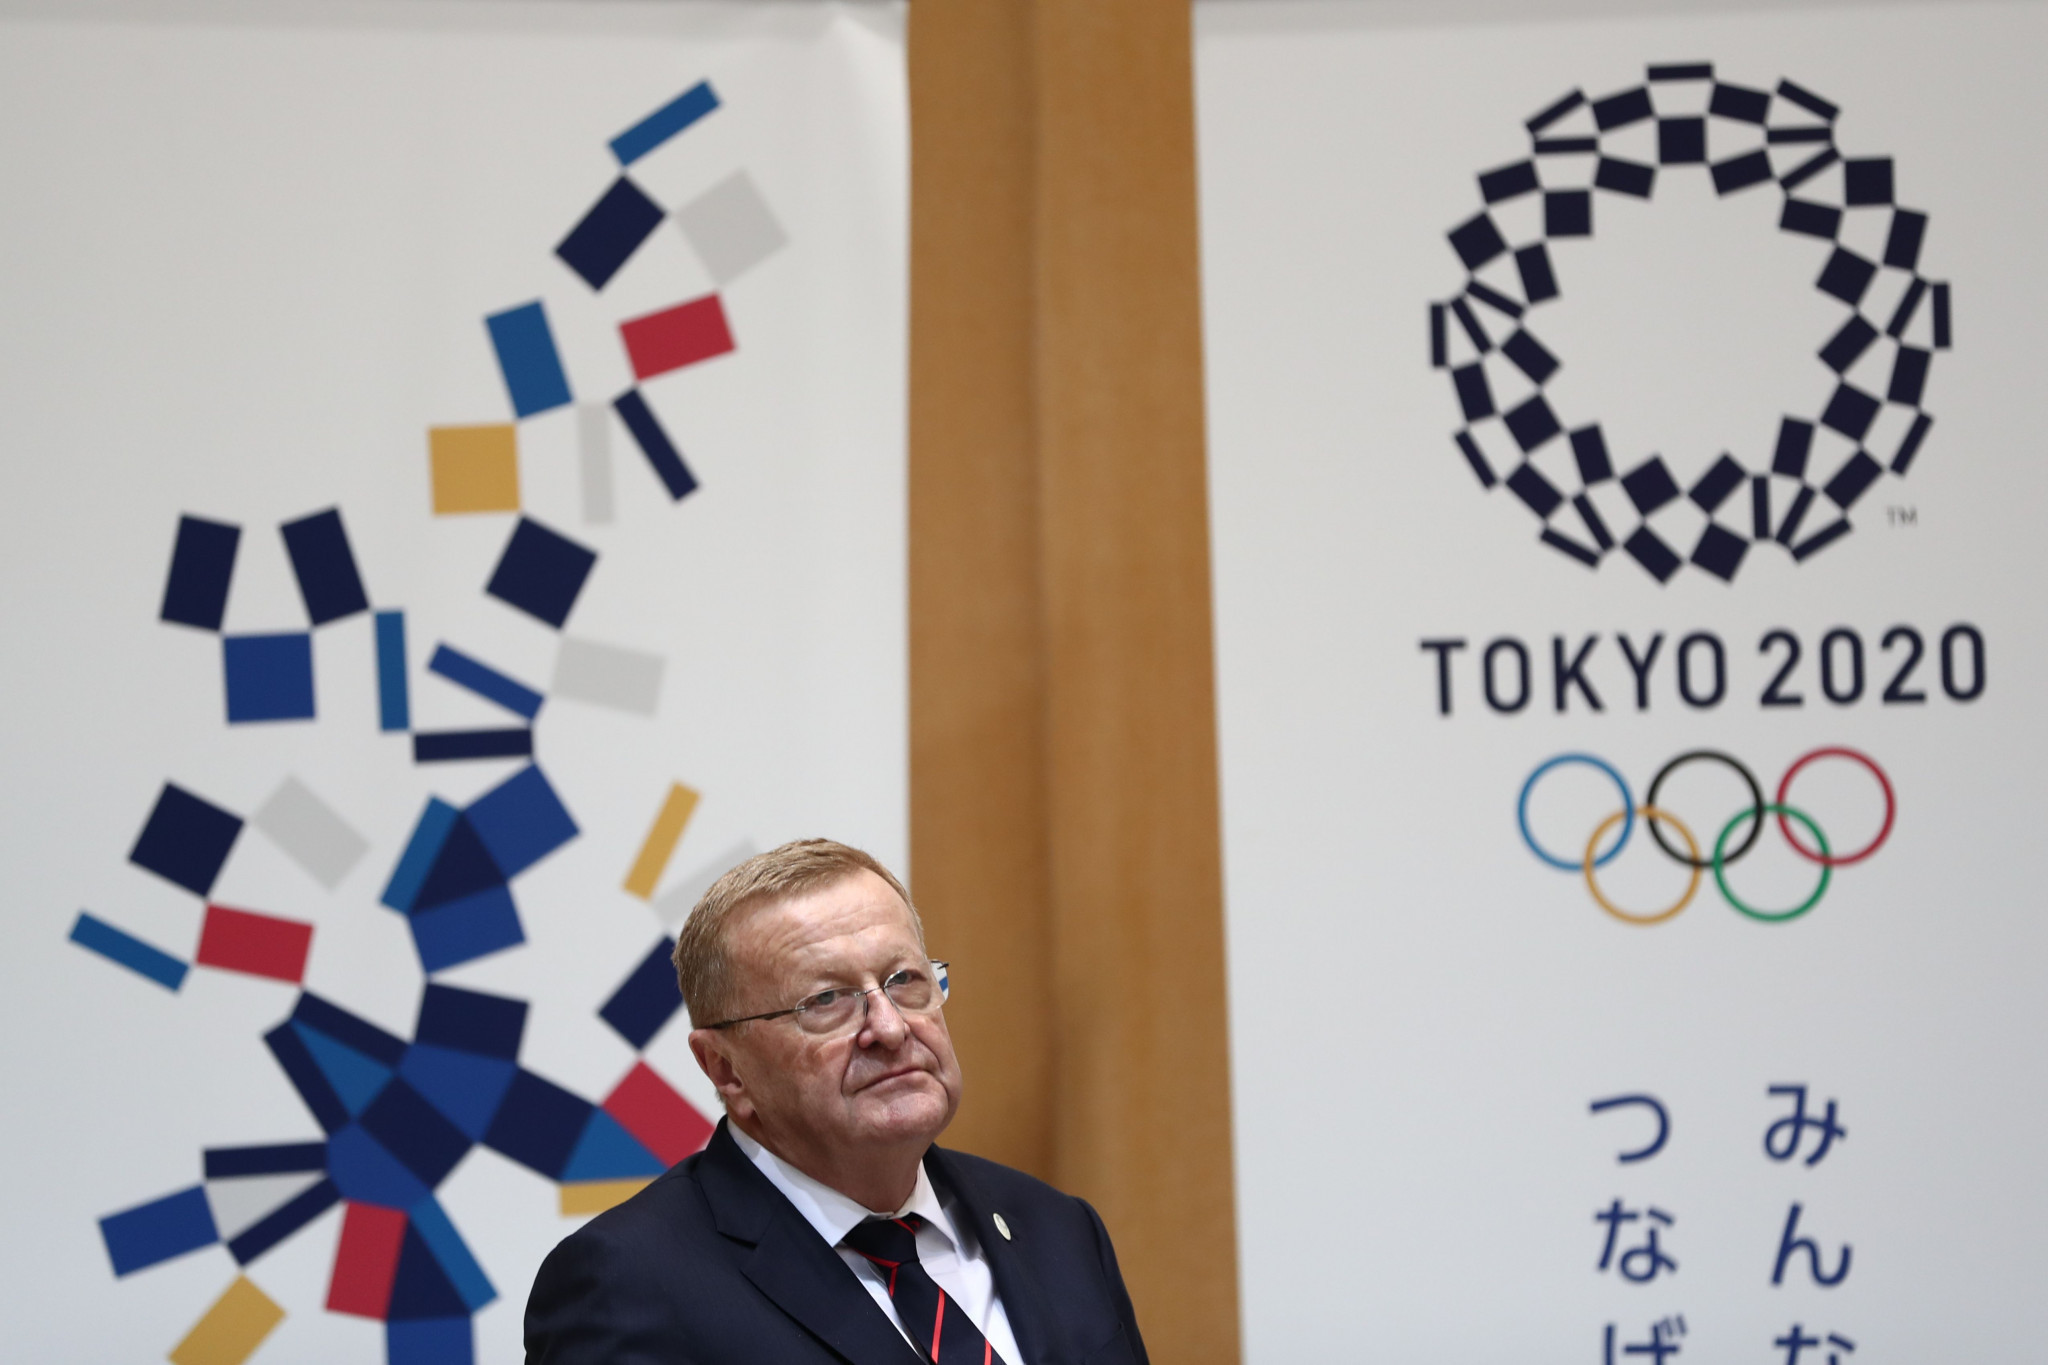 International Olympic Committee vice-president John Coates is a member of Rugby Australia's Rugby World Cup Advisory Board as the country plans a bid for the 2027 event  ©Getty Images